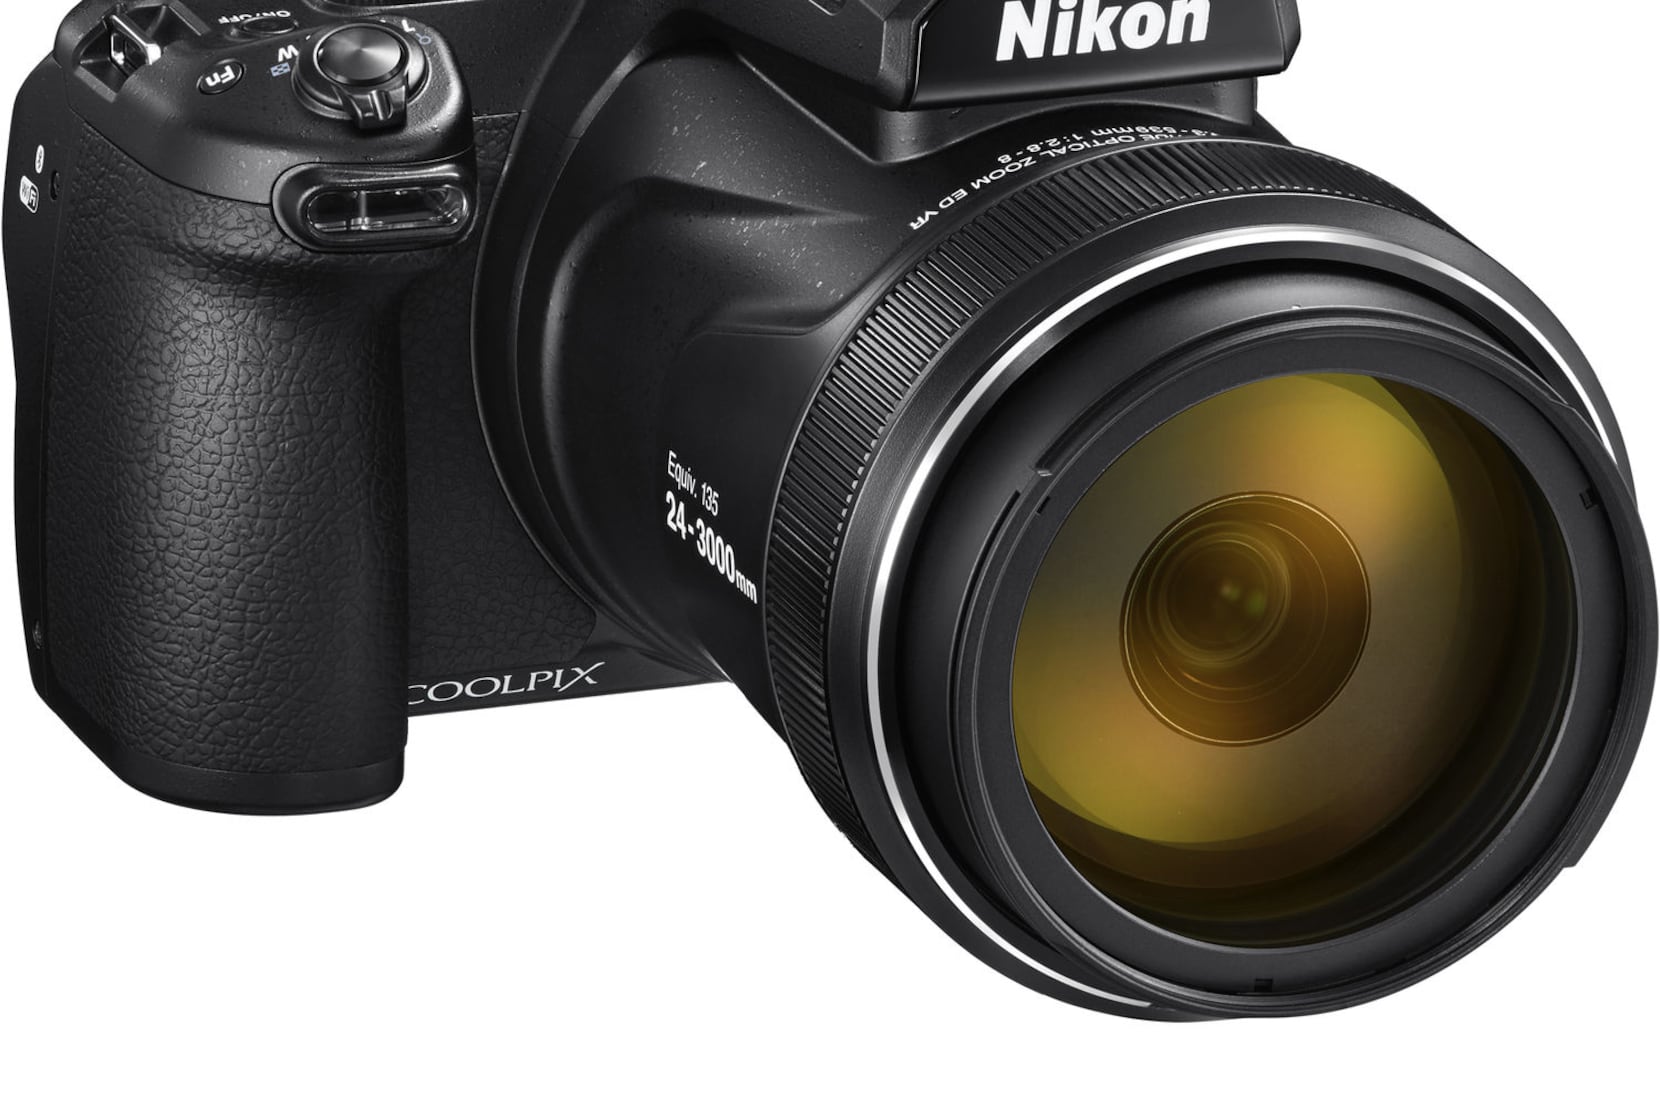 Nikon gives the Coolpix P900 a monstrous 83x optical zoom